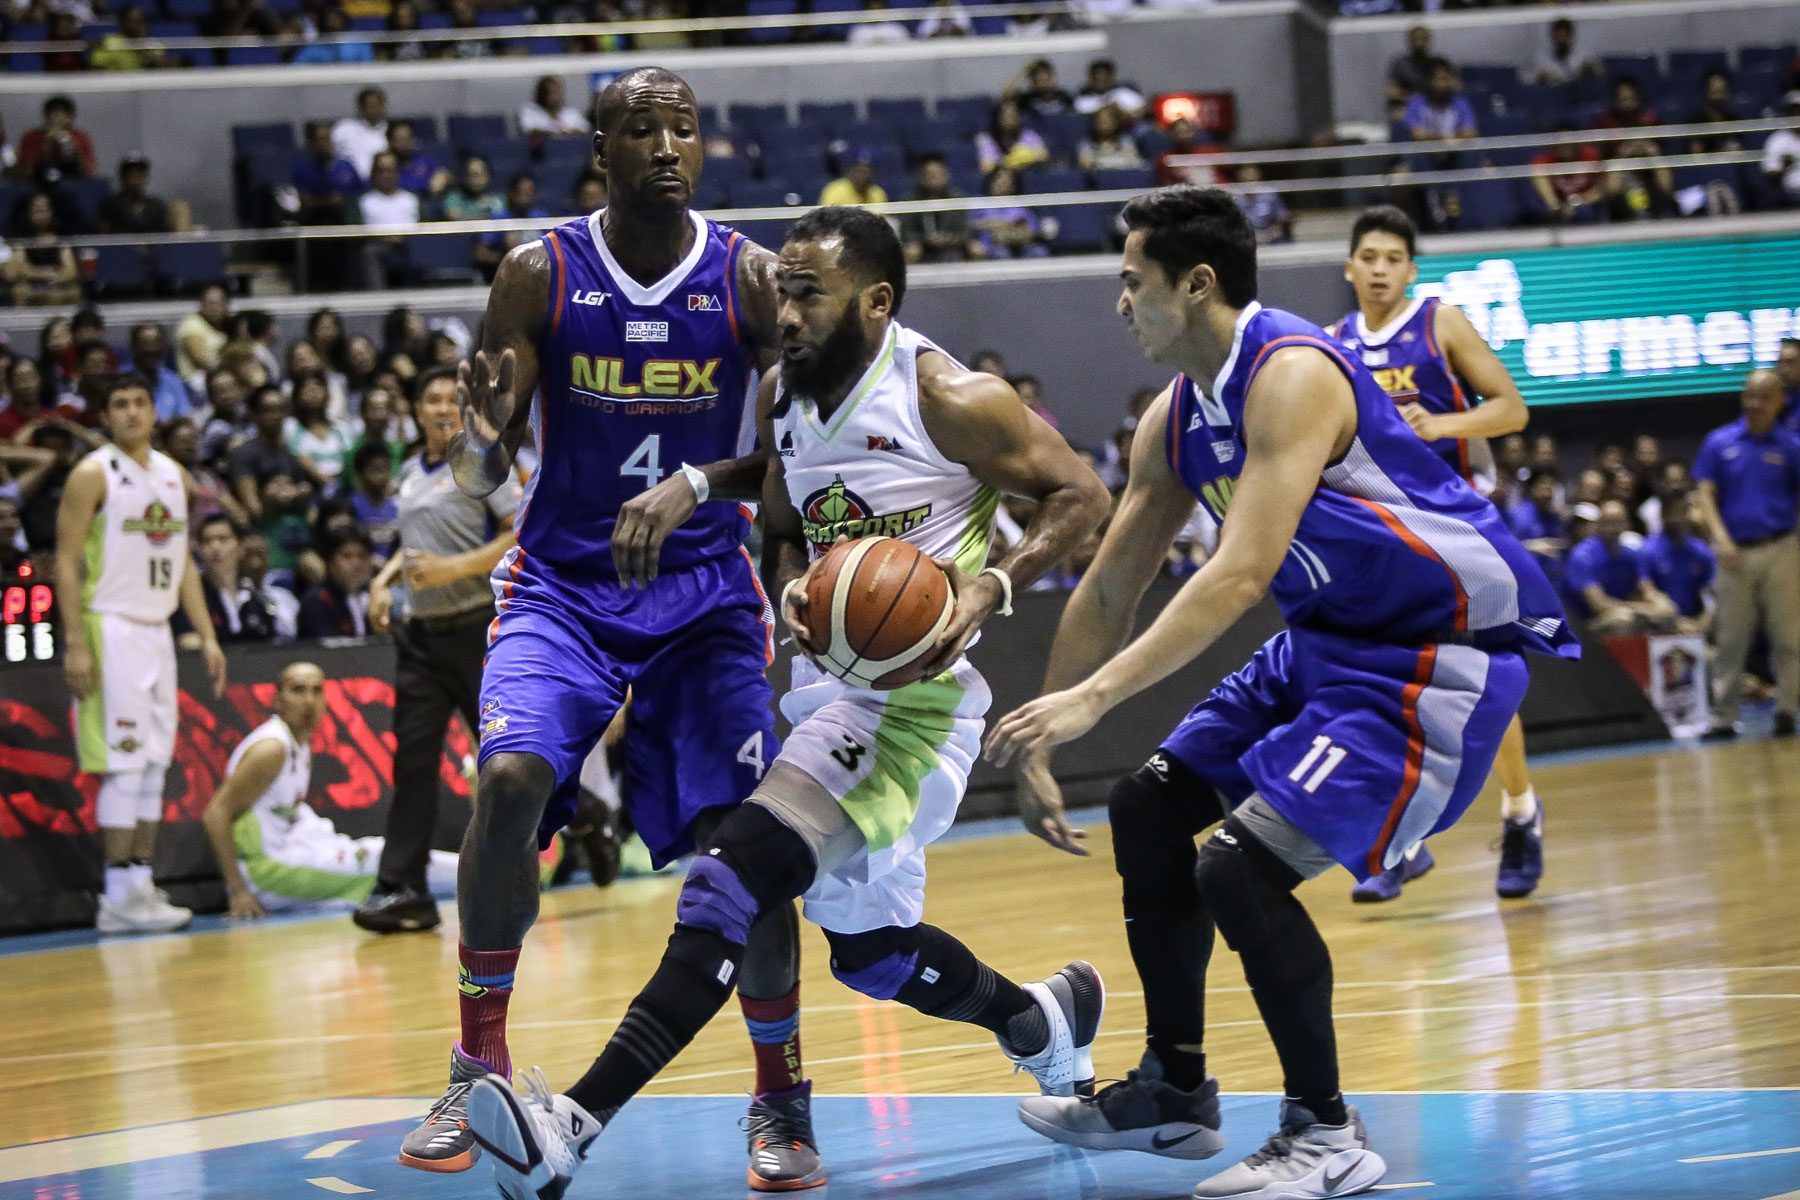 GlobalPort squeaks by NLEX to end drought